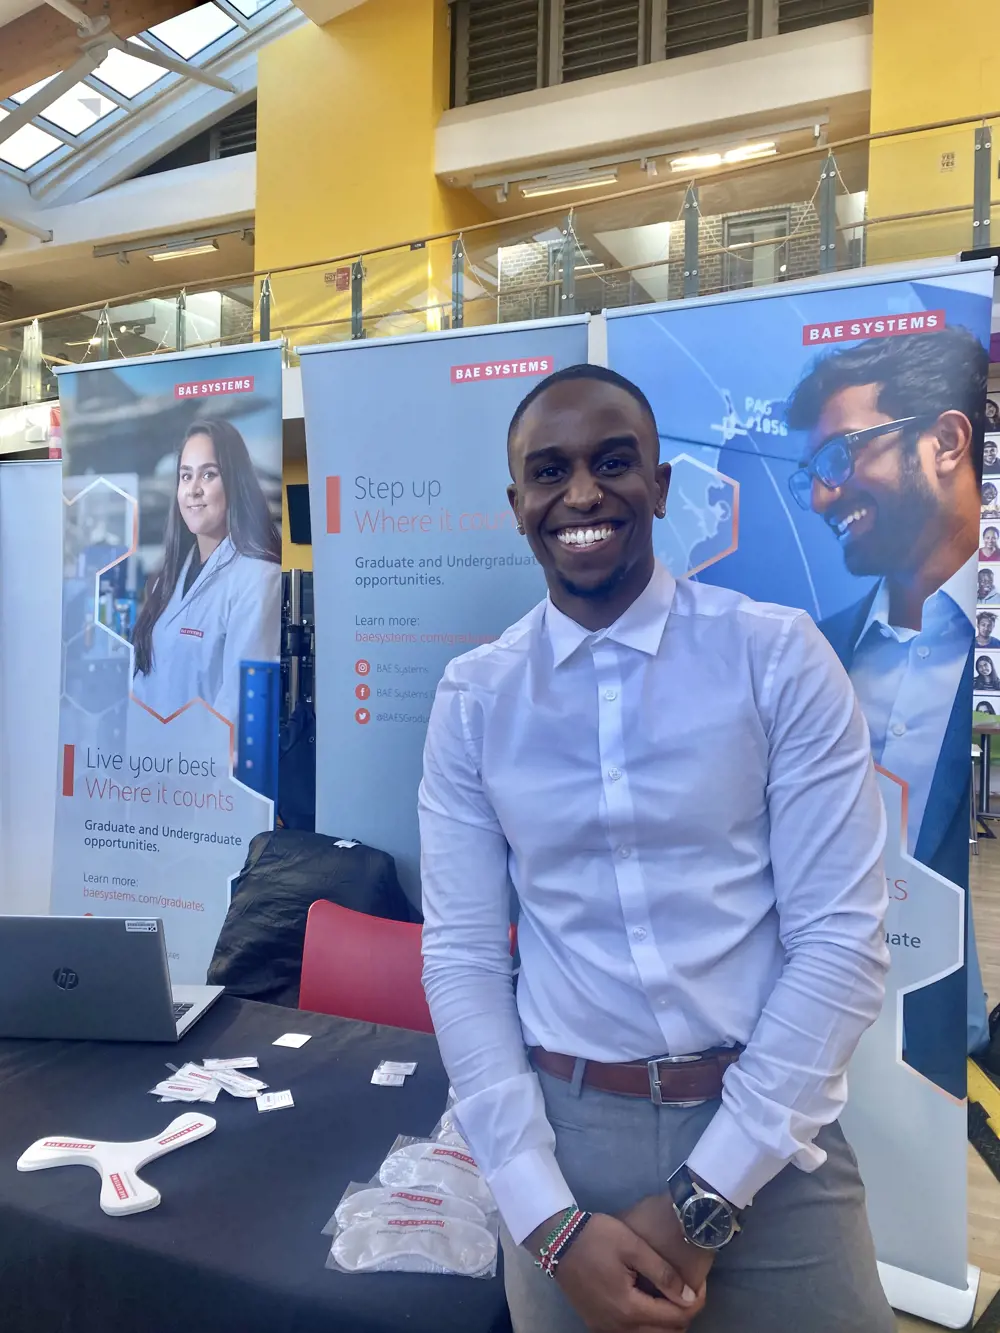 An aerospace engineer standing in front of a BAE Systems desk at a careers fair.